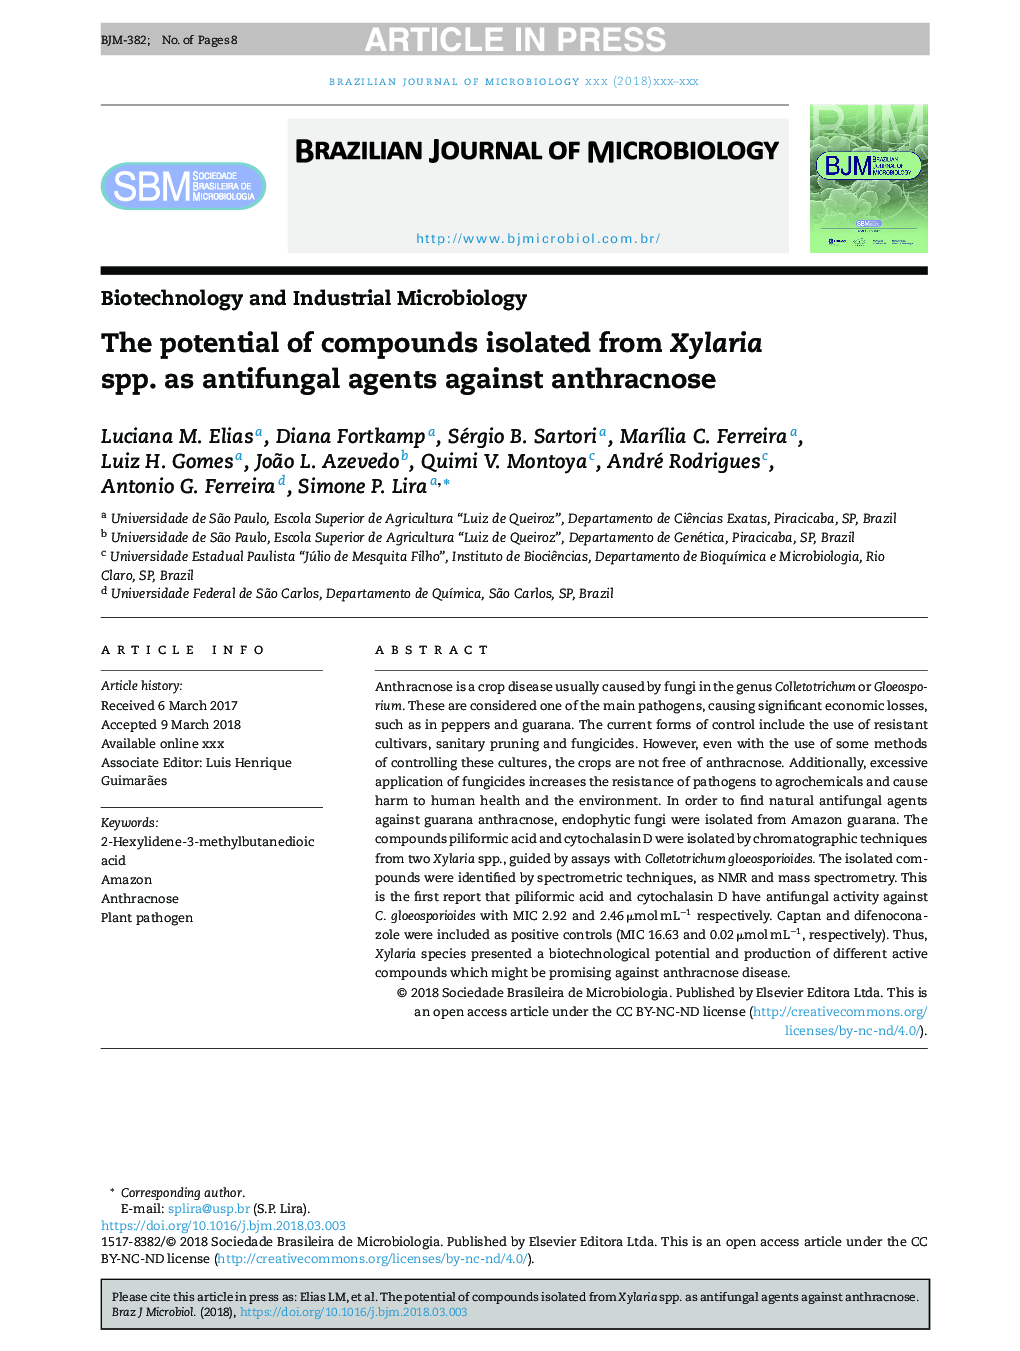 The potential of compounds isolated from Xylaria spp. as antifungal agents against anthracnose